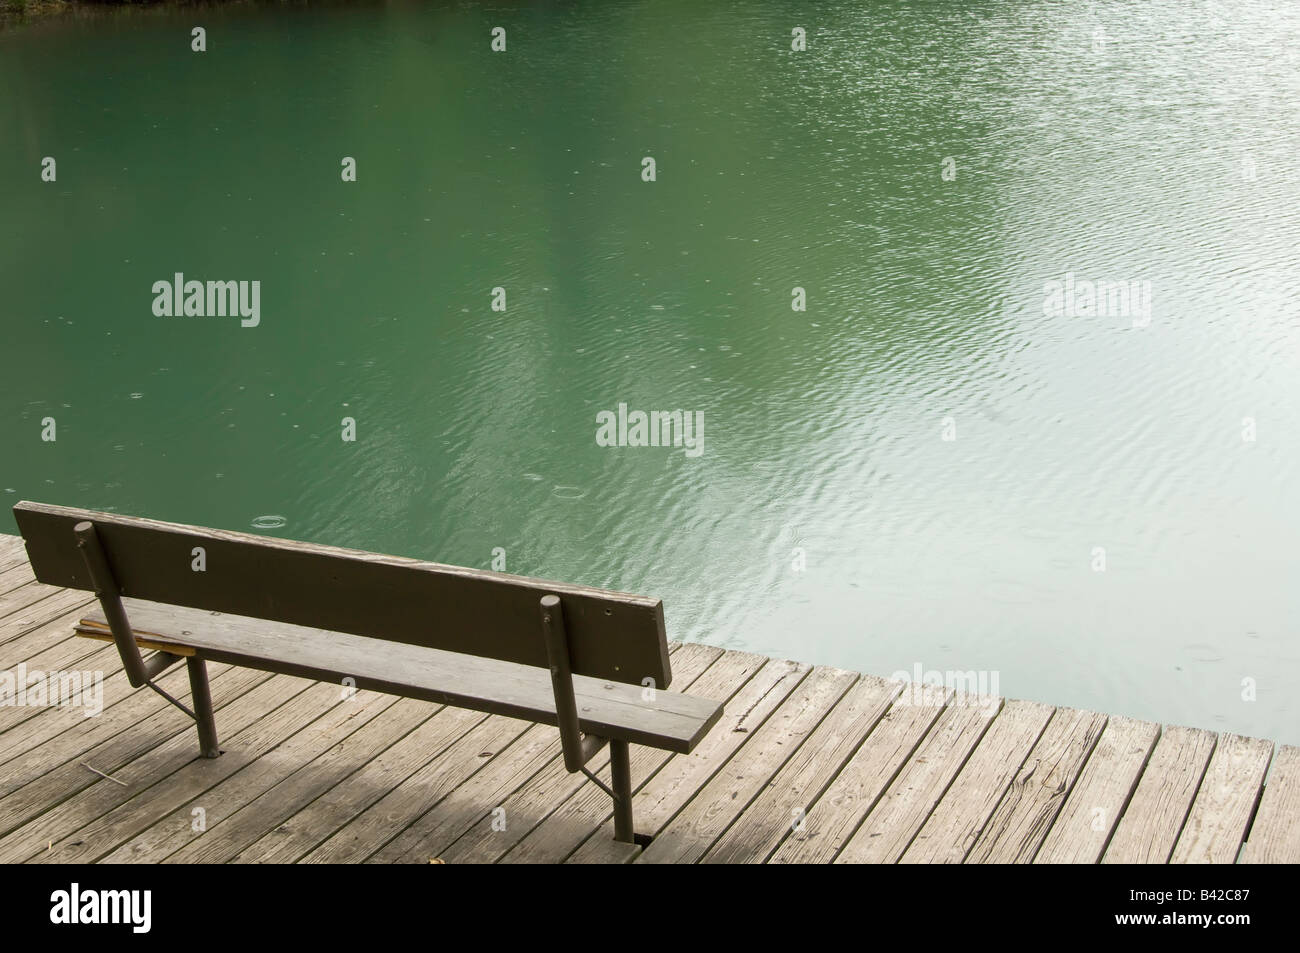 Vacant park bench on dock by lake in spring drizzle Stock Photo